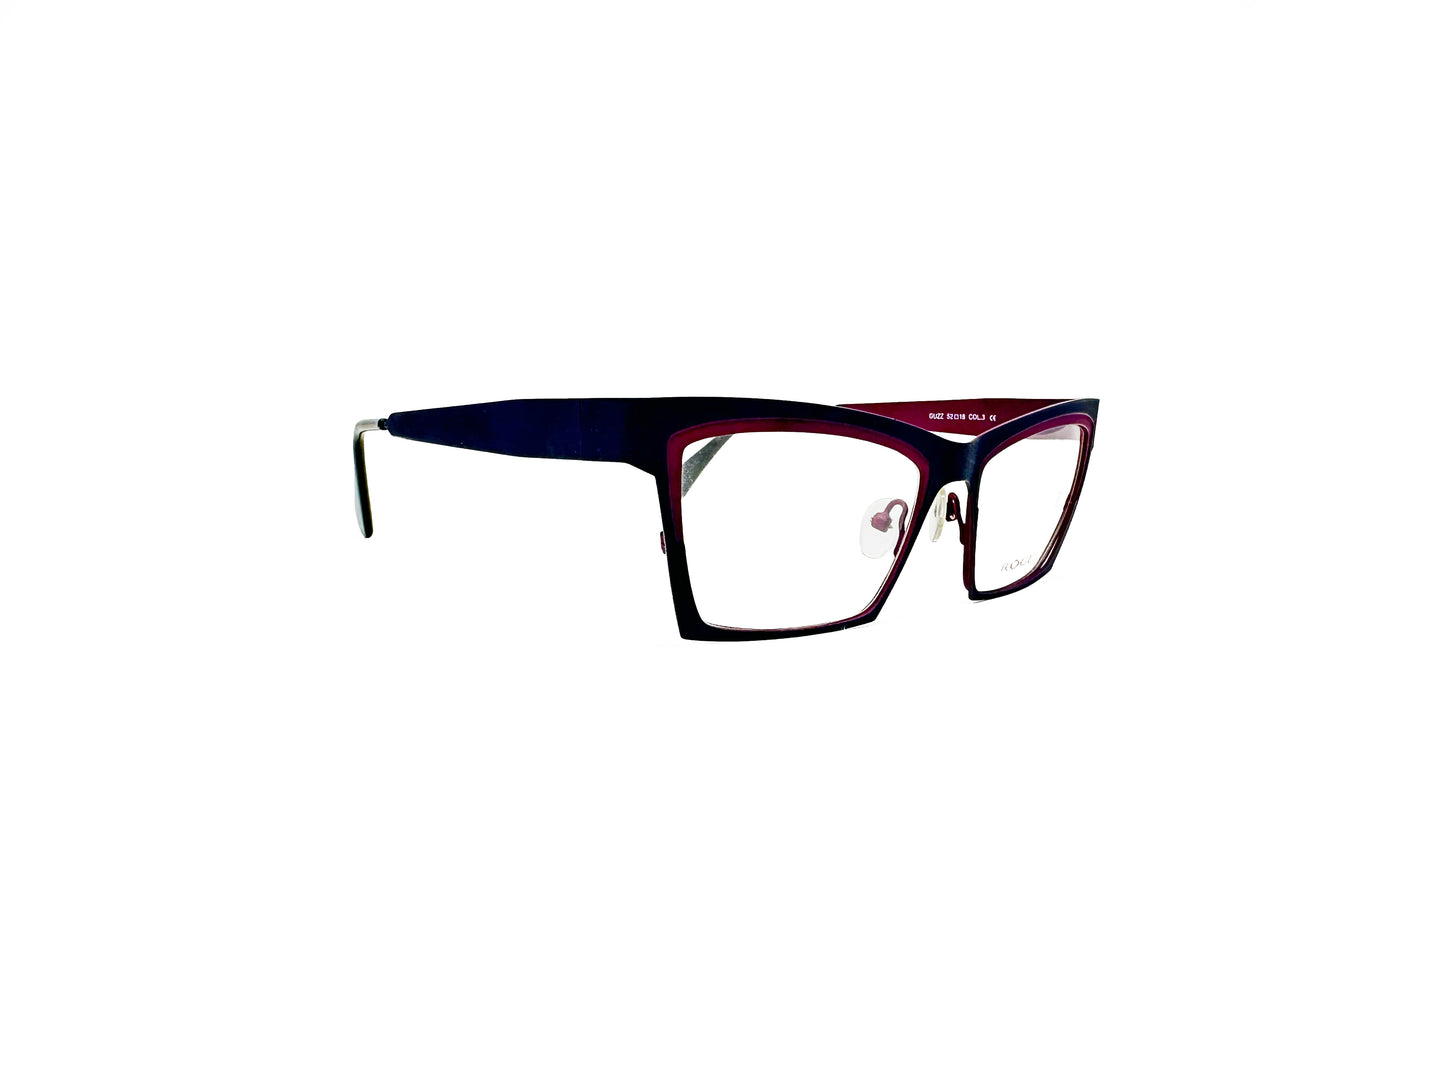 Roger metal, angled cat-eye optical frame. Model: Guzz. Color: 3 - Black with red inner trim. Side view.